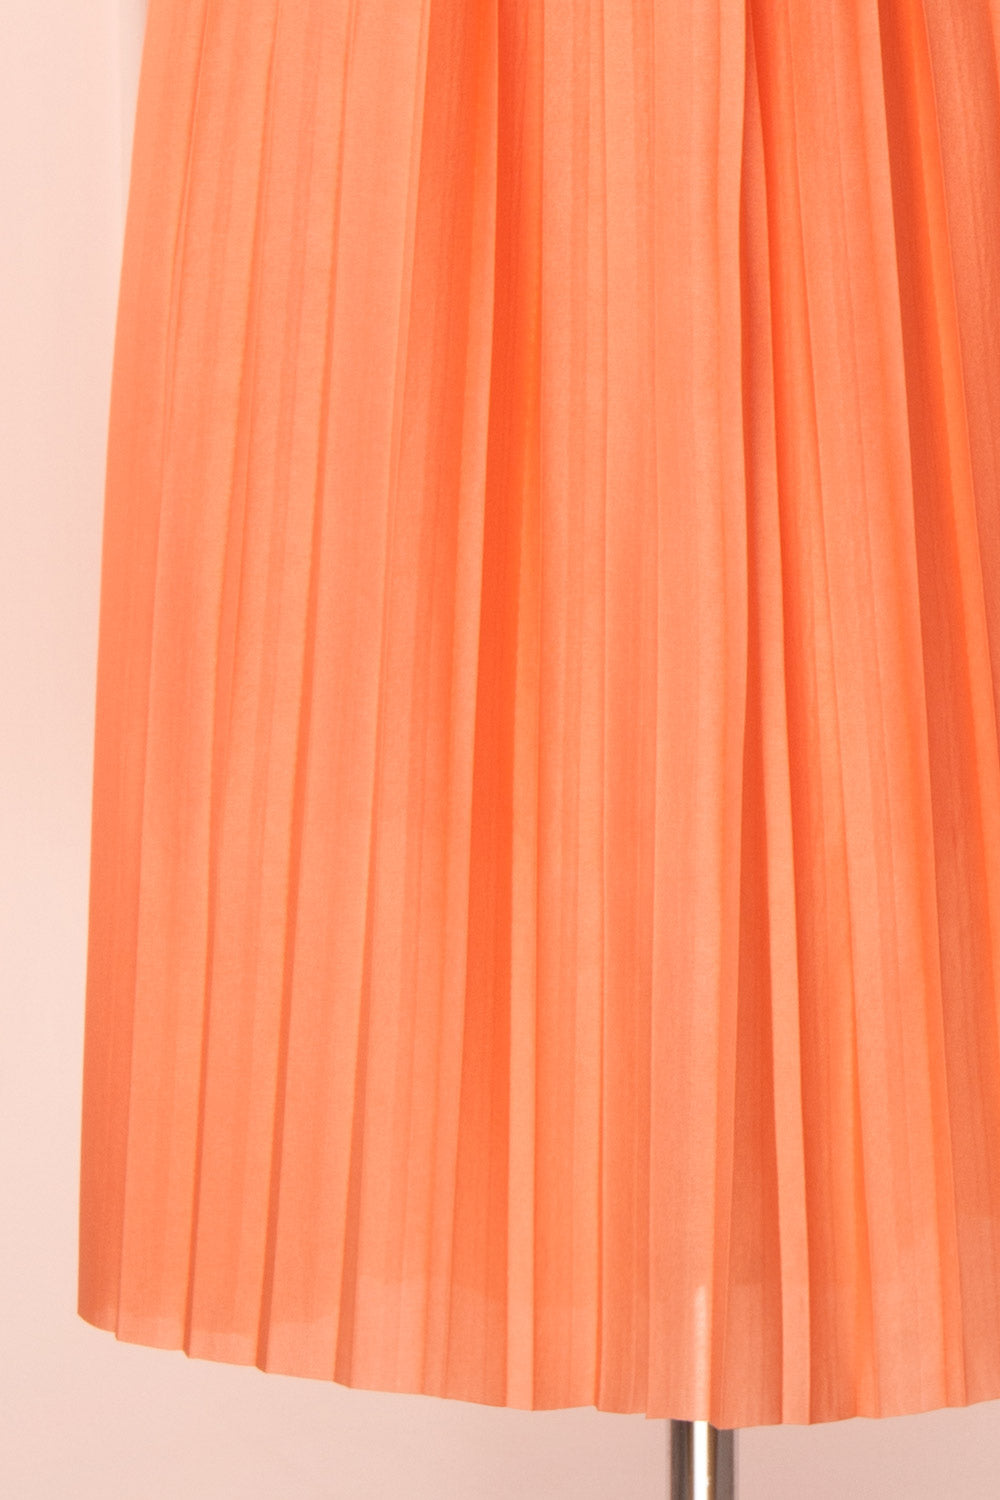 Ostra Petal Coral Pleated Midi Dress | Boutique 1861 skirt